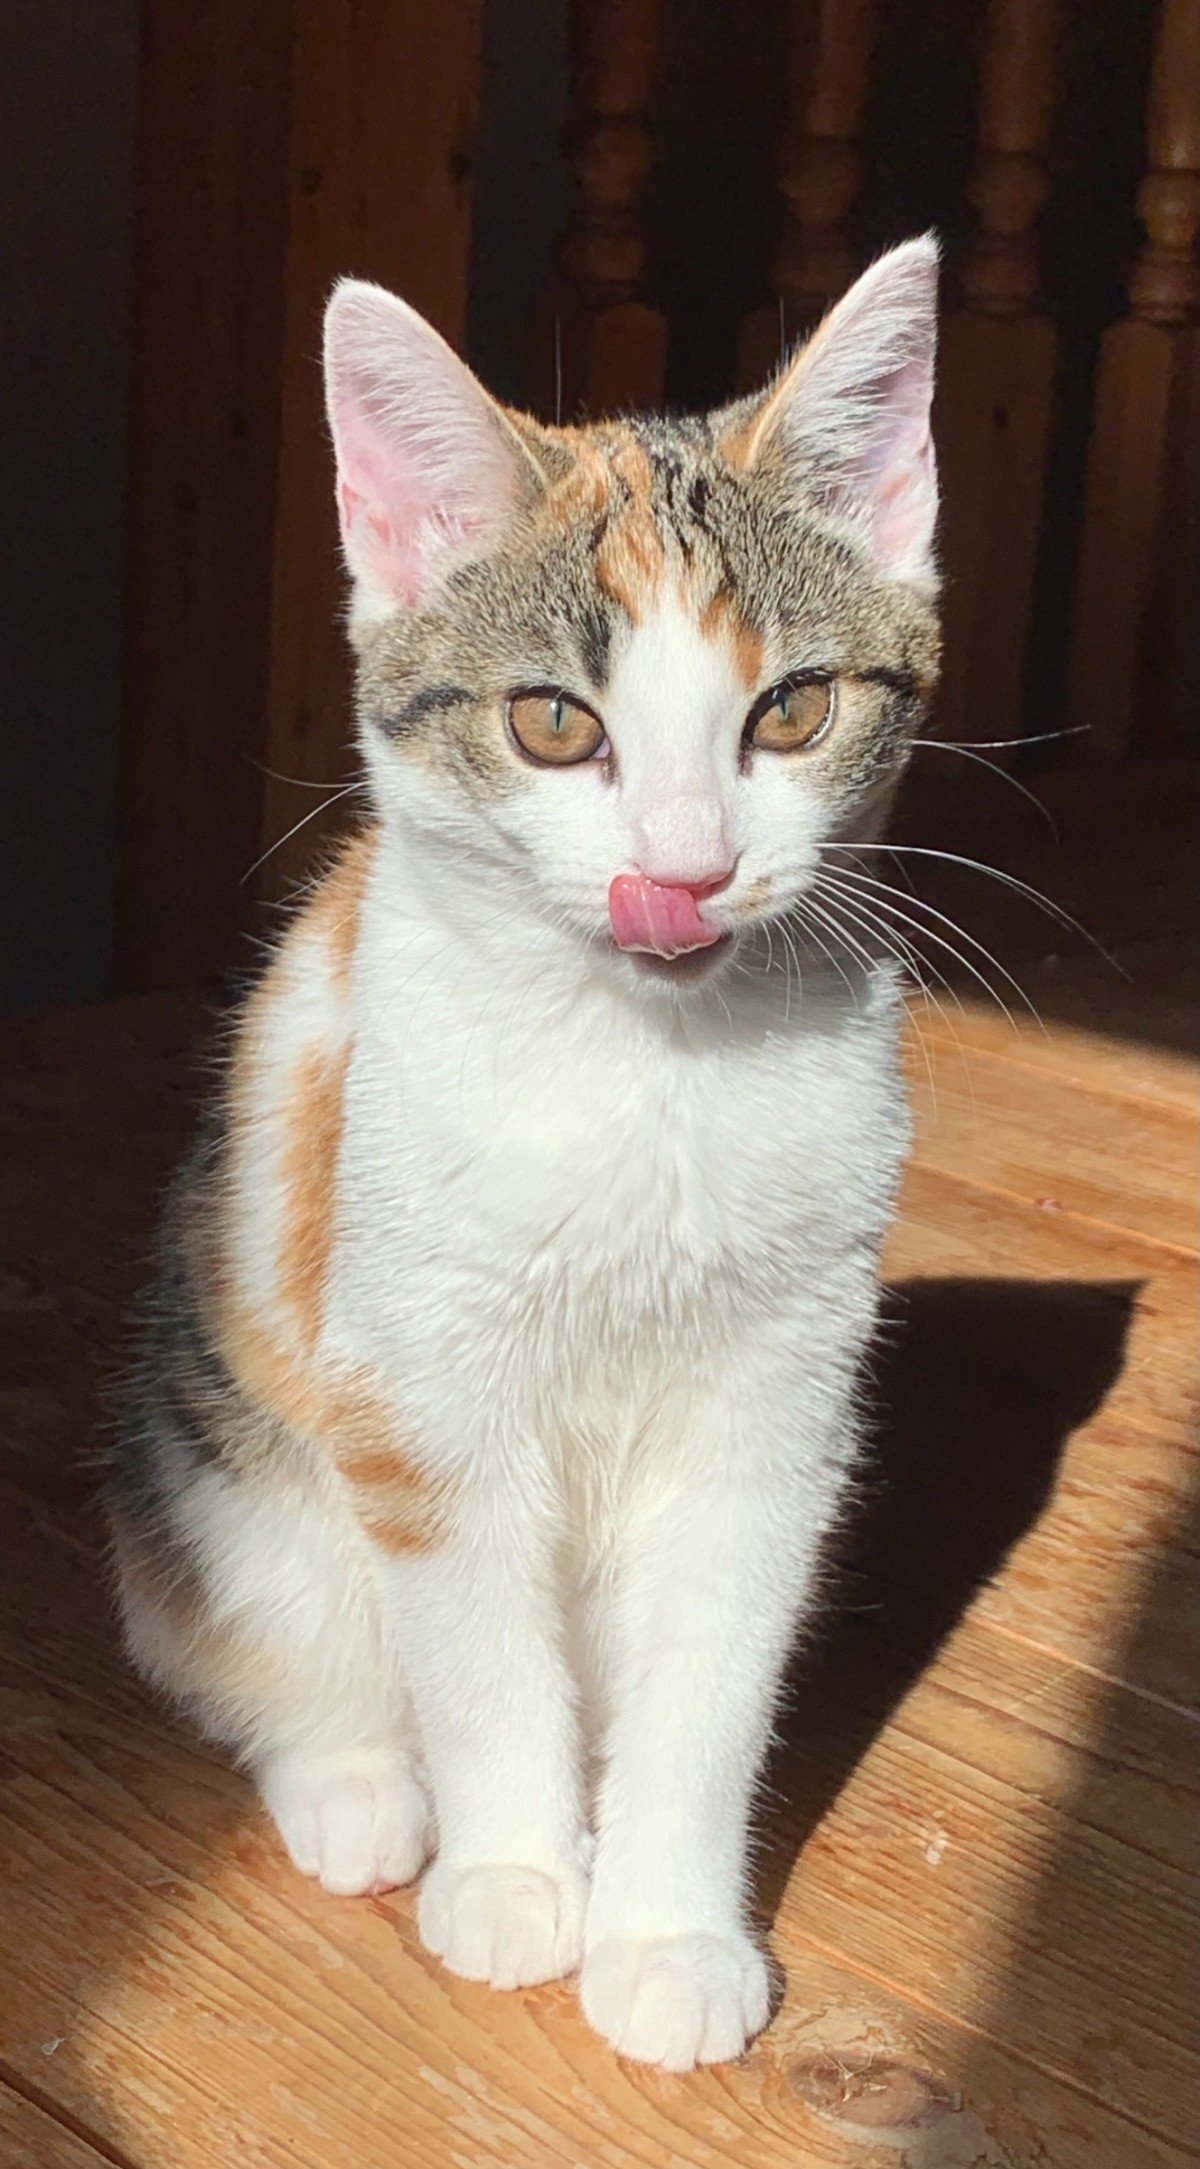 What Breed Is My Female Calico Cat?